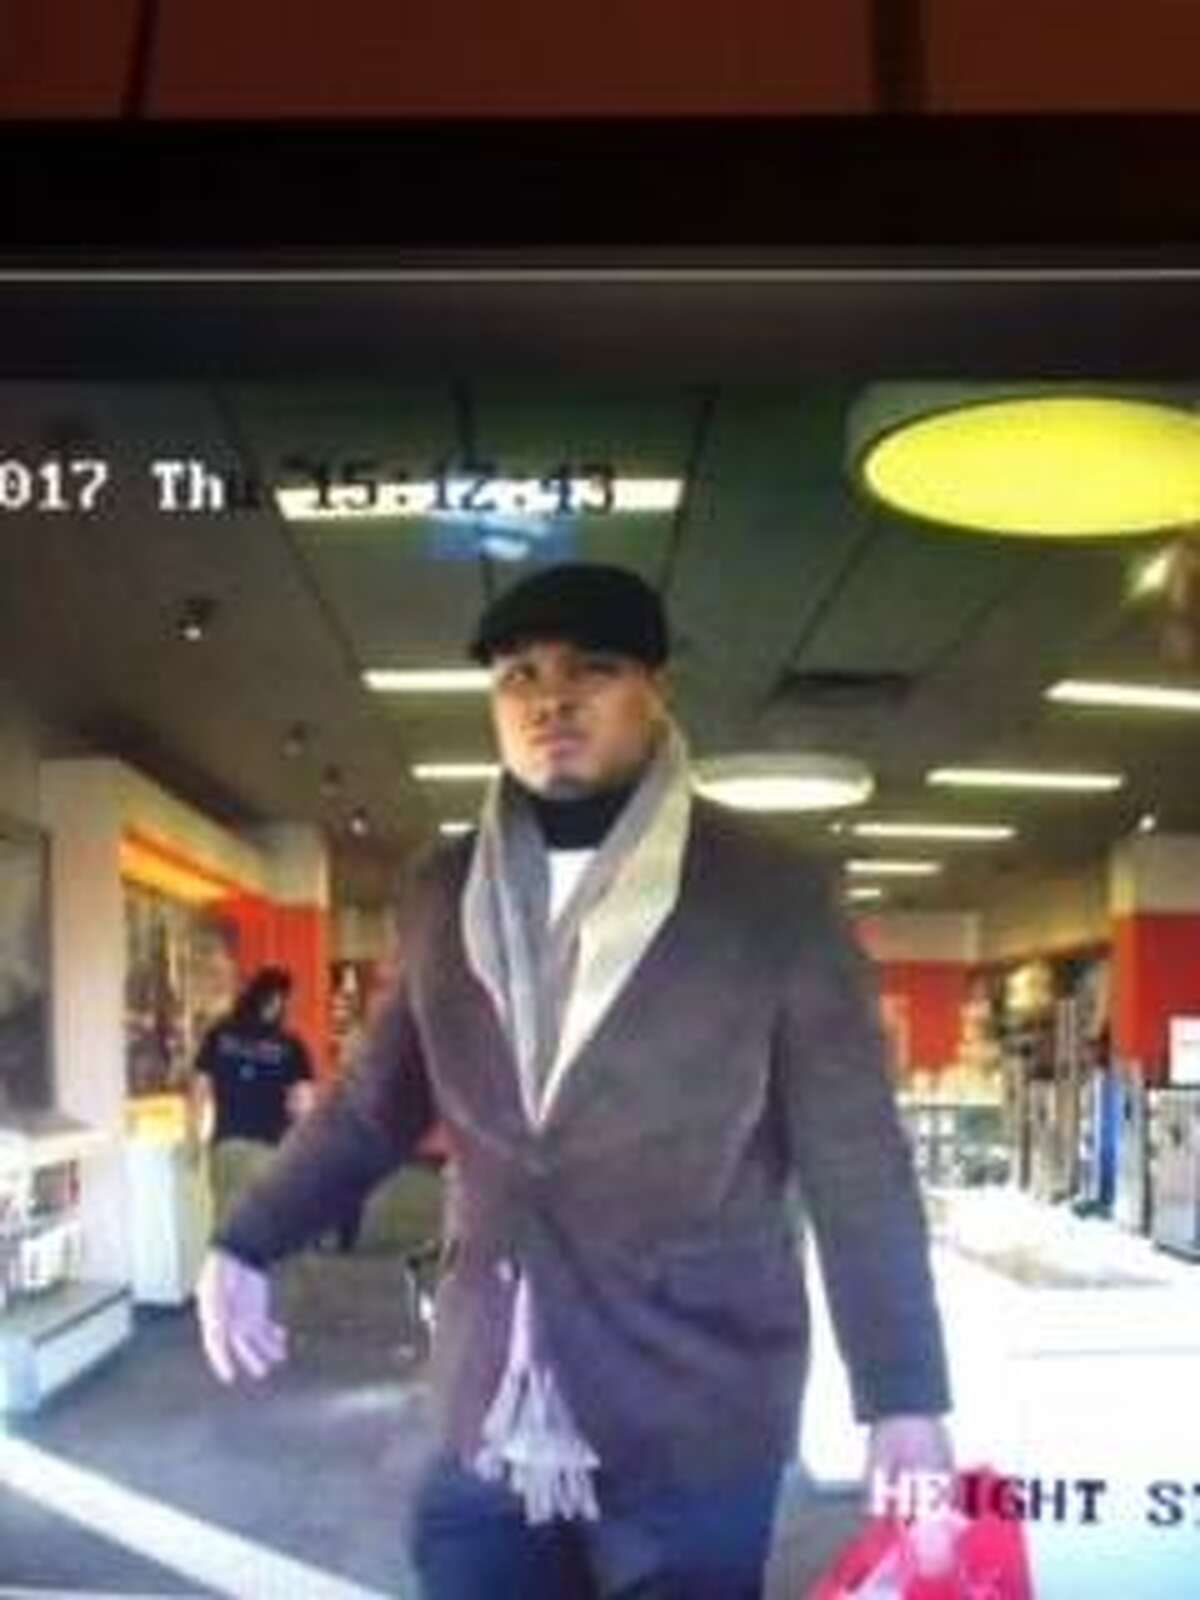 New Haven police need help in identifying this suspect in a theft from the AT& store on Whalley Avenue